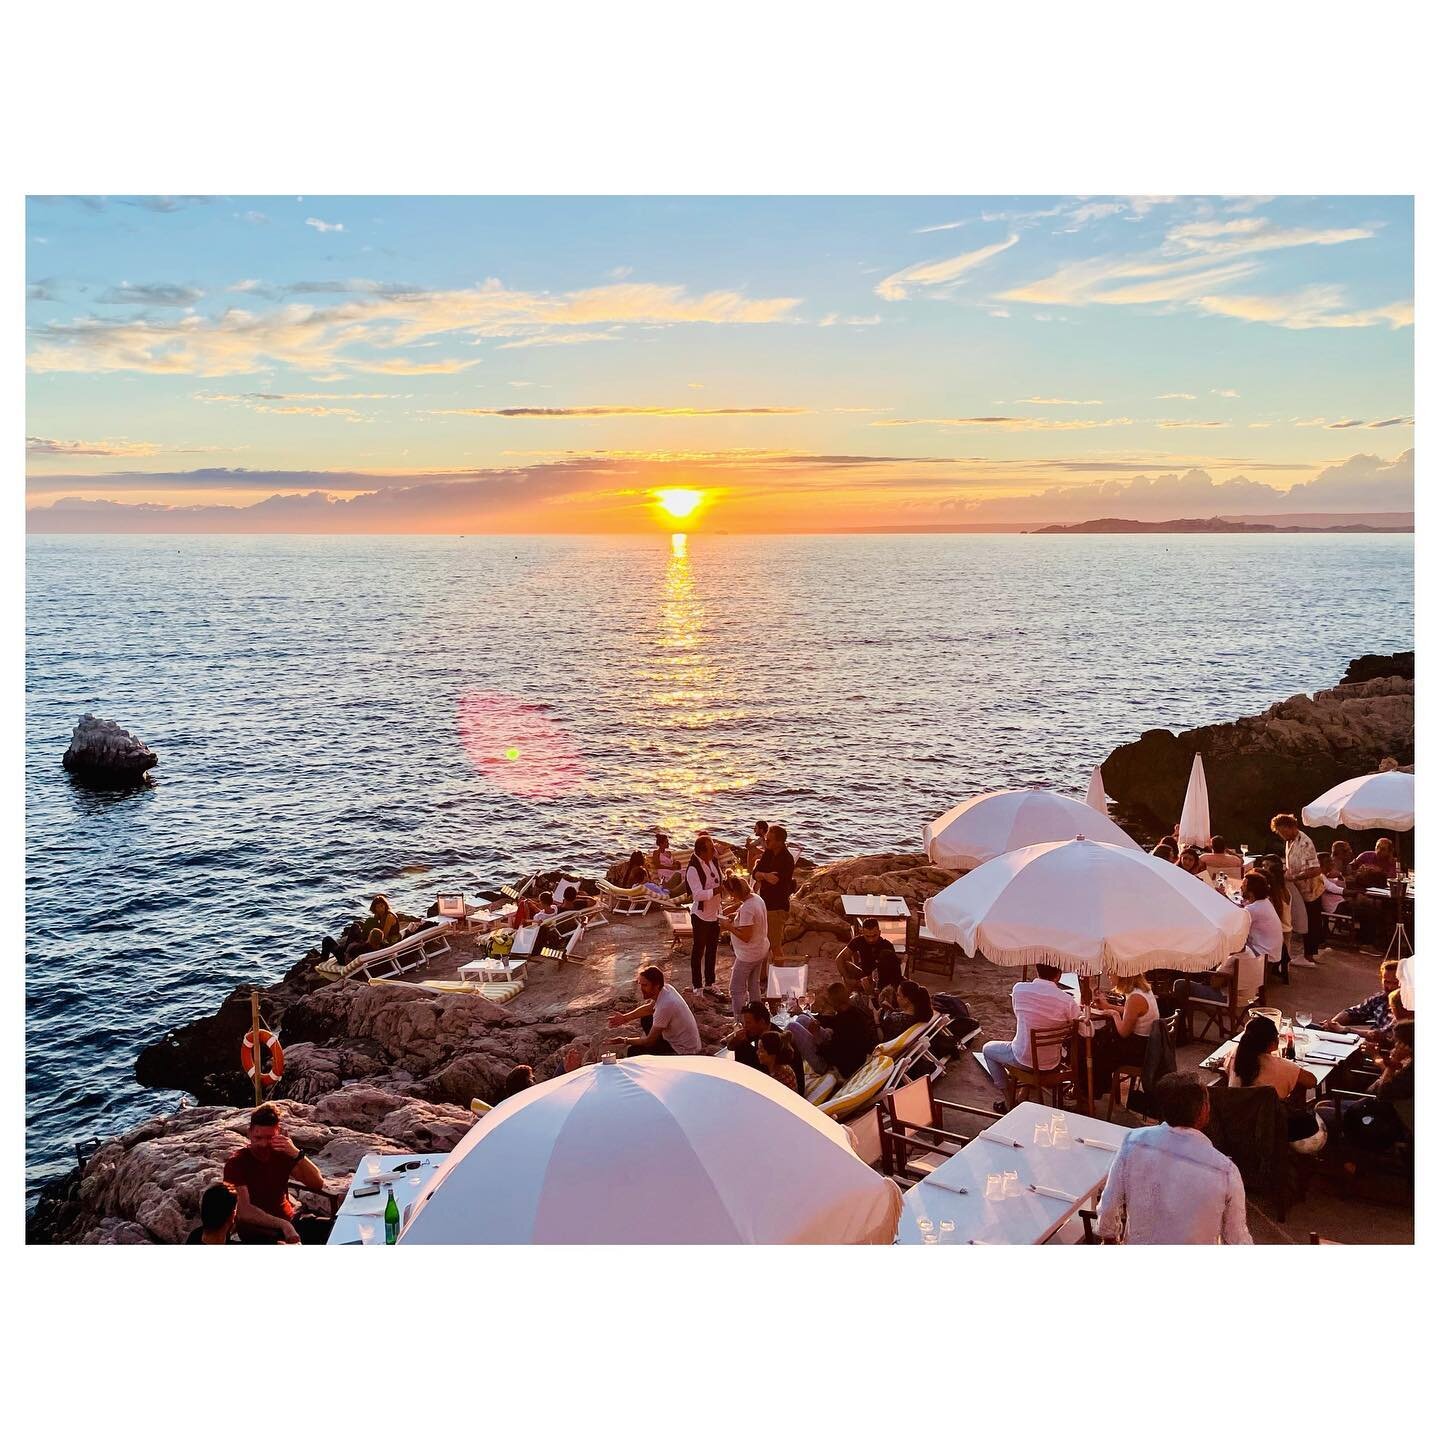 IT&rsquo;S ALL ABOUT SUNSET &amp; LIFE 
.
.
.
#swimming_time #beachday #aperotime #swimming #peoplephotography #summervibes #summerlife #beachlife #shadesofblue #shadesofmagic #mediterraneansea #mediterraneanlife #sealovers #tubaclubmarseille #medite